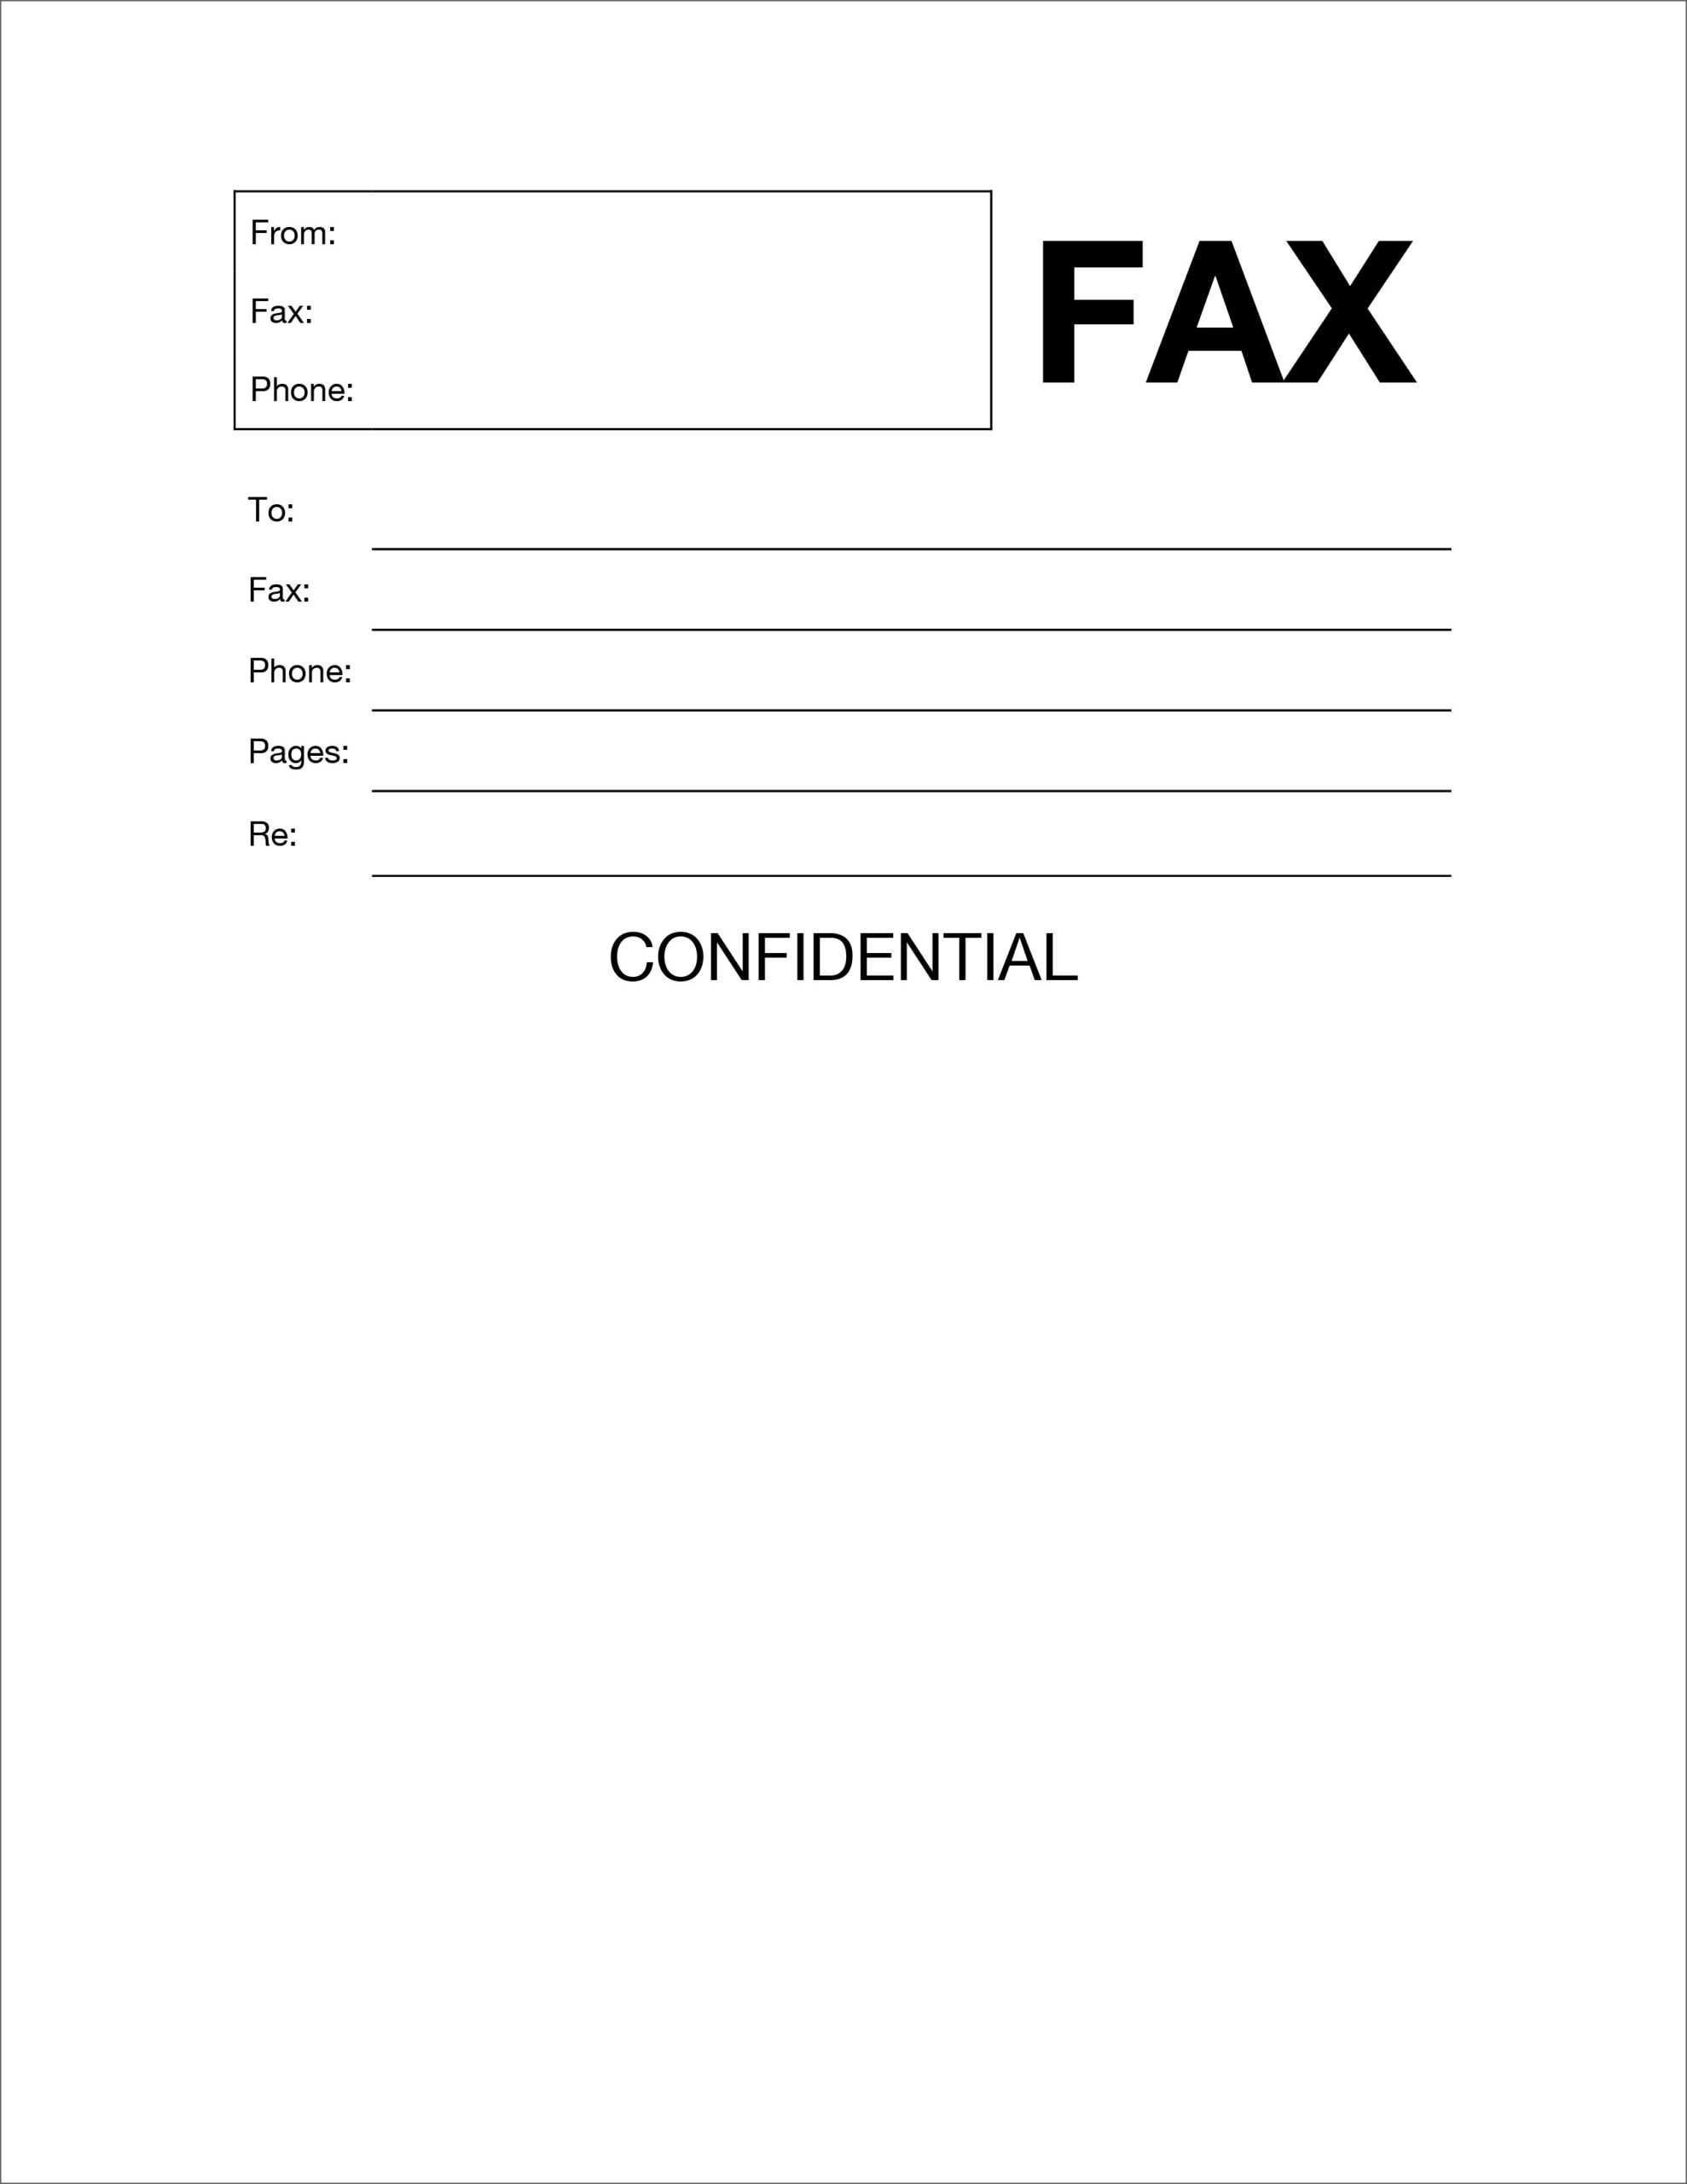 Free Cover Sheet – Tomope.zaribanks.co With Regard To Fax Cover Sheet Template Word 2010